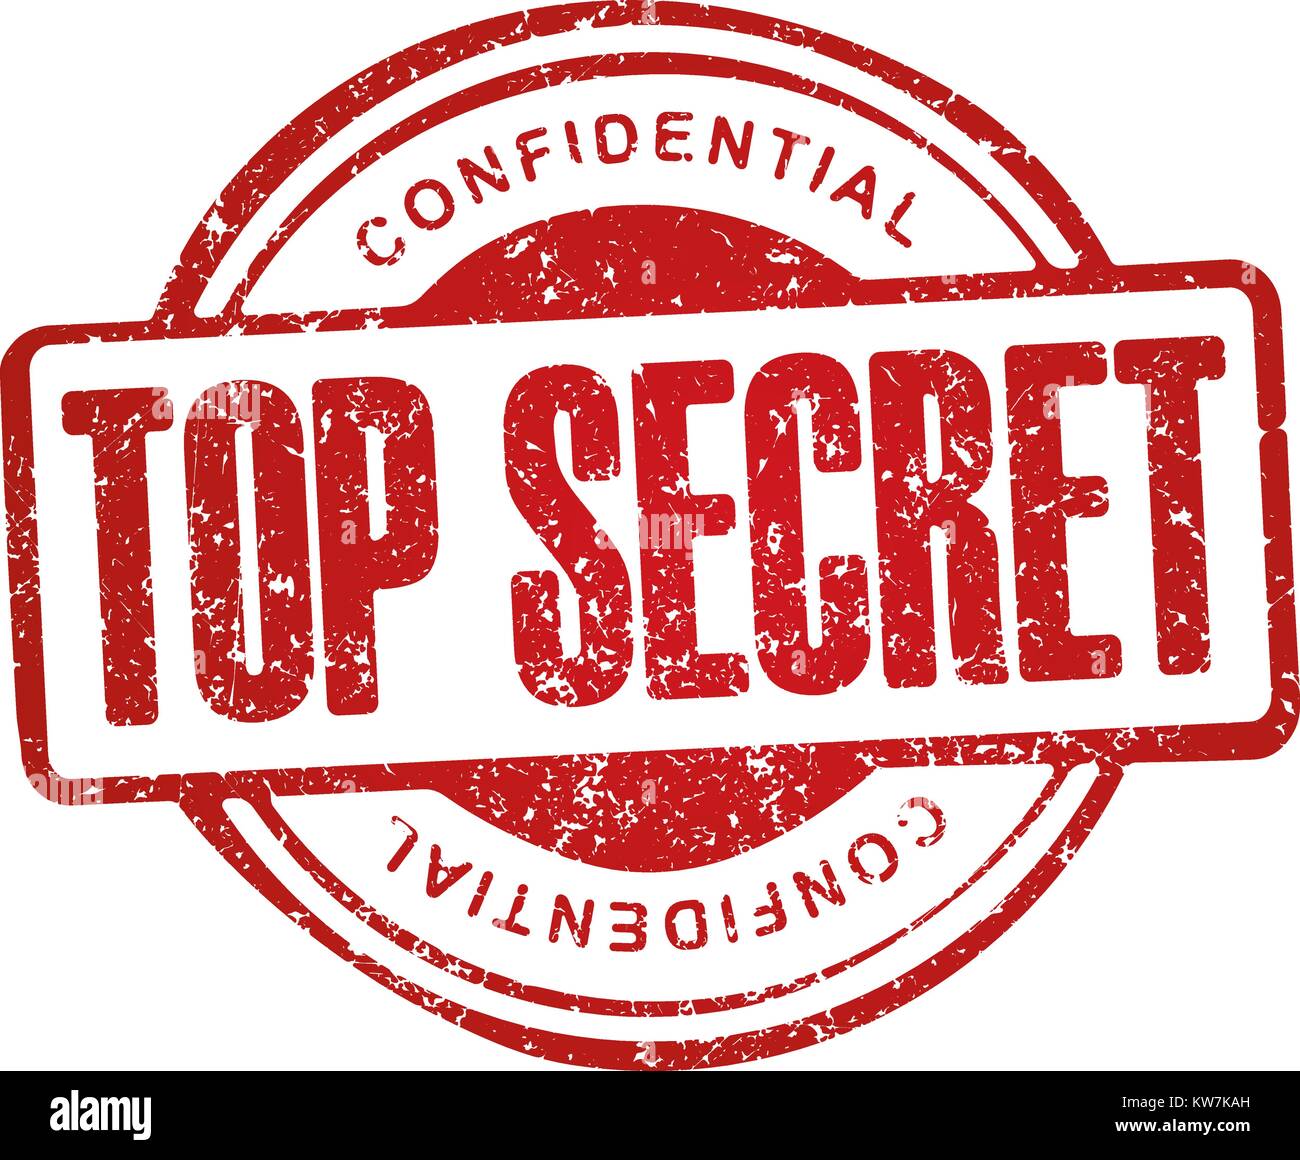 Top secret, confidential. Grunge style red rubber stamp Stock Vector ...